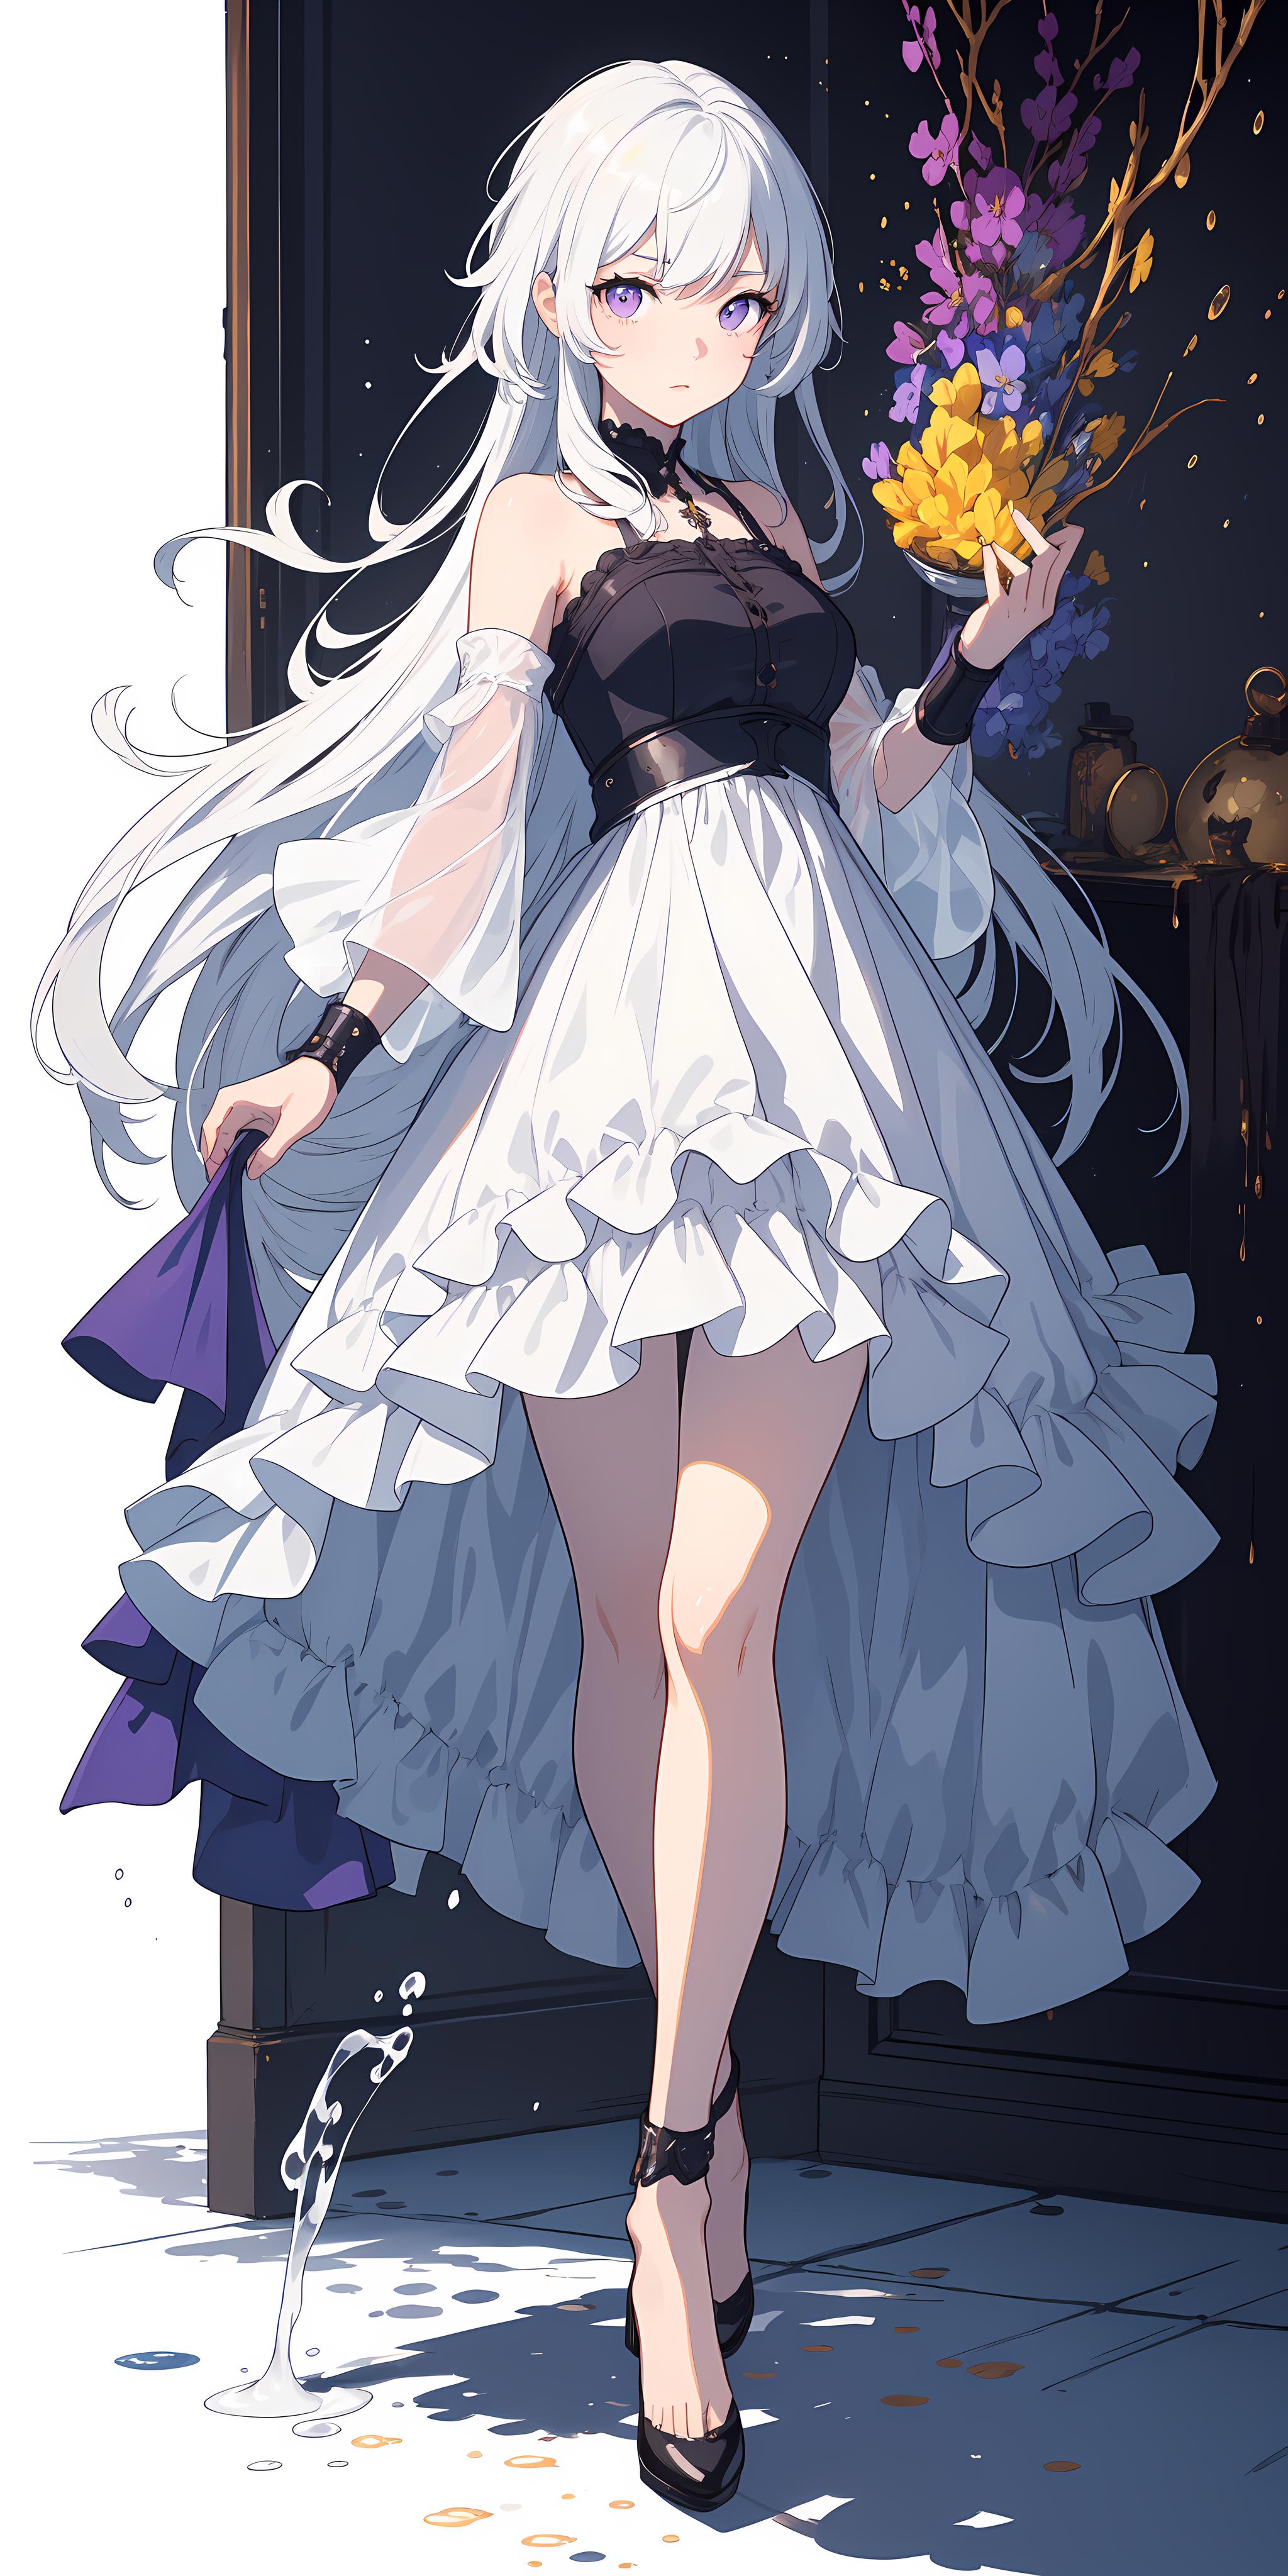 A beautifully drawn image of a woman in a white dress with blue accents, holding a blue umbrella.